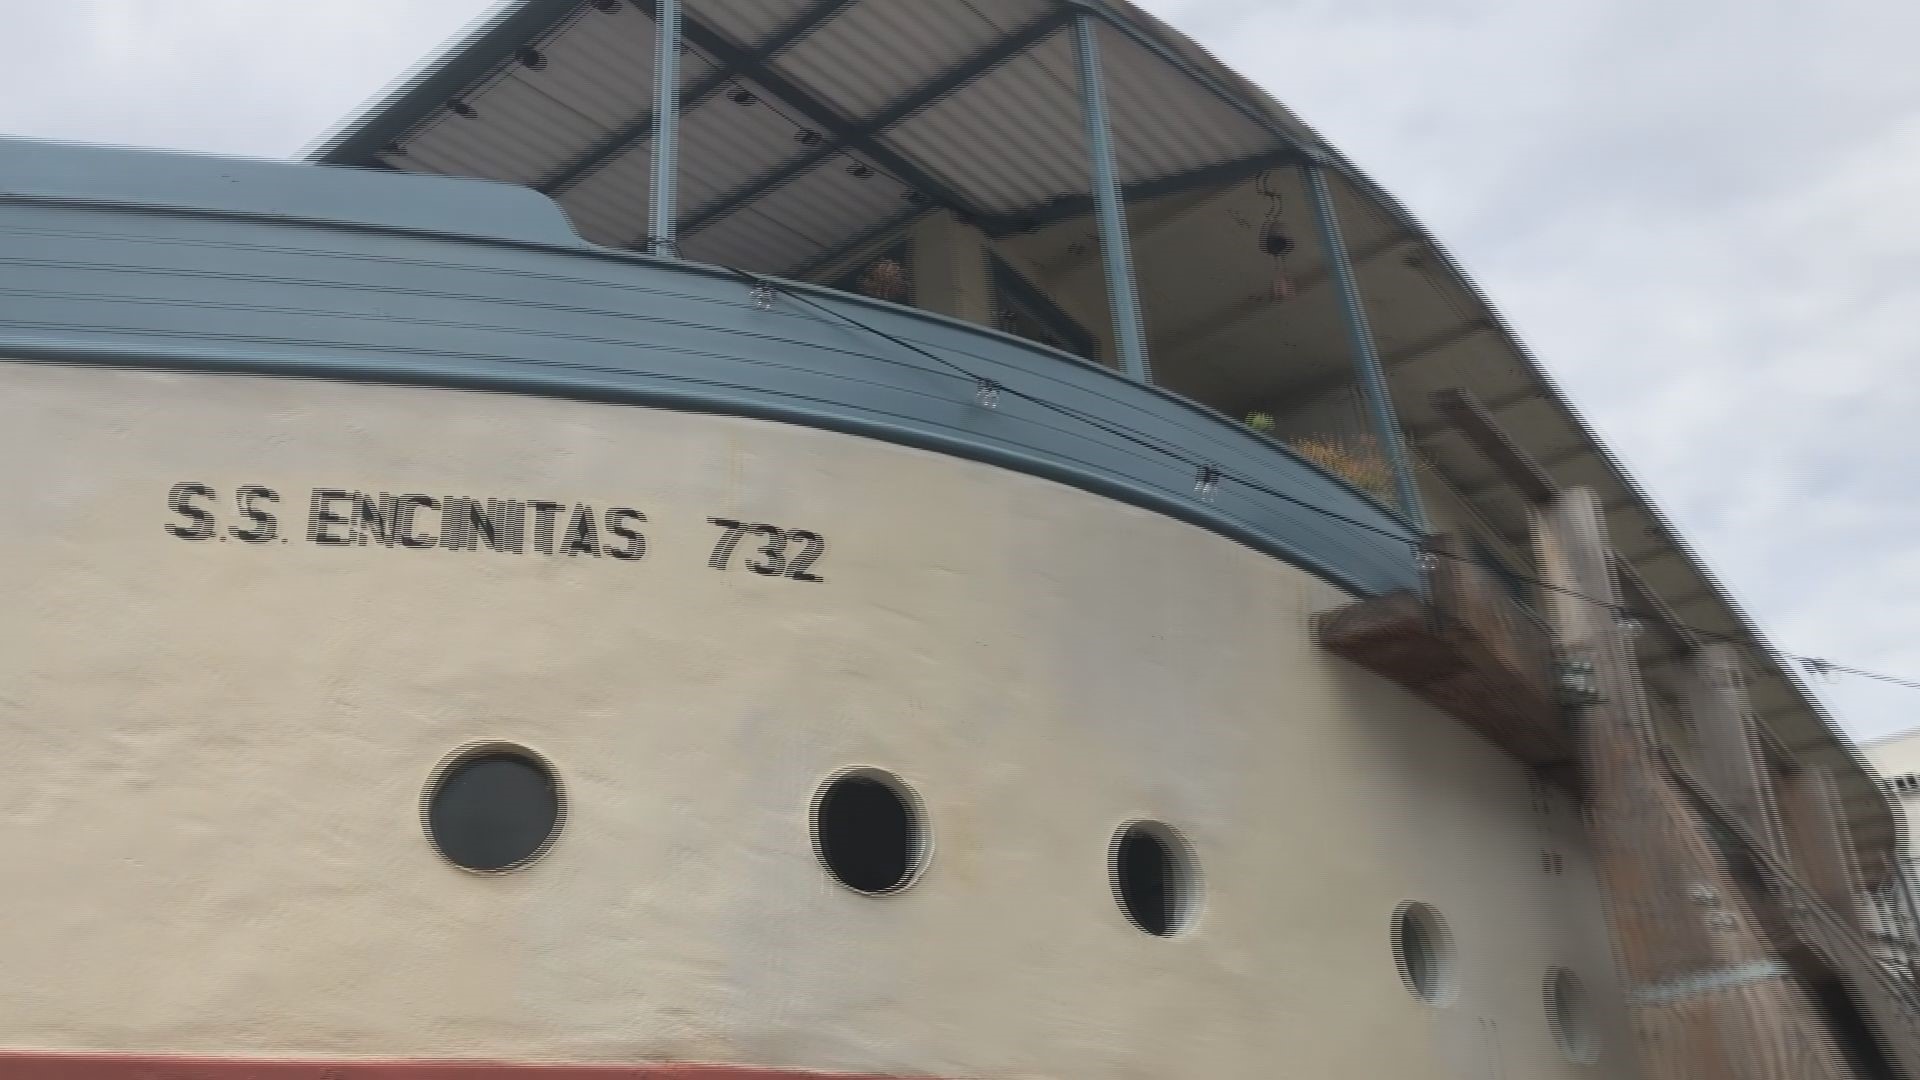 A pair of homes in Encinitas could soon be recognized nationally as historic landmarks. In August, a state commission will consider that distinction for two boathouses that have been docked in Encinitas for nearly a century.